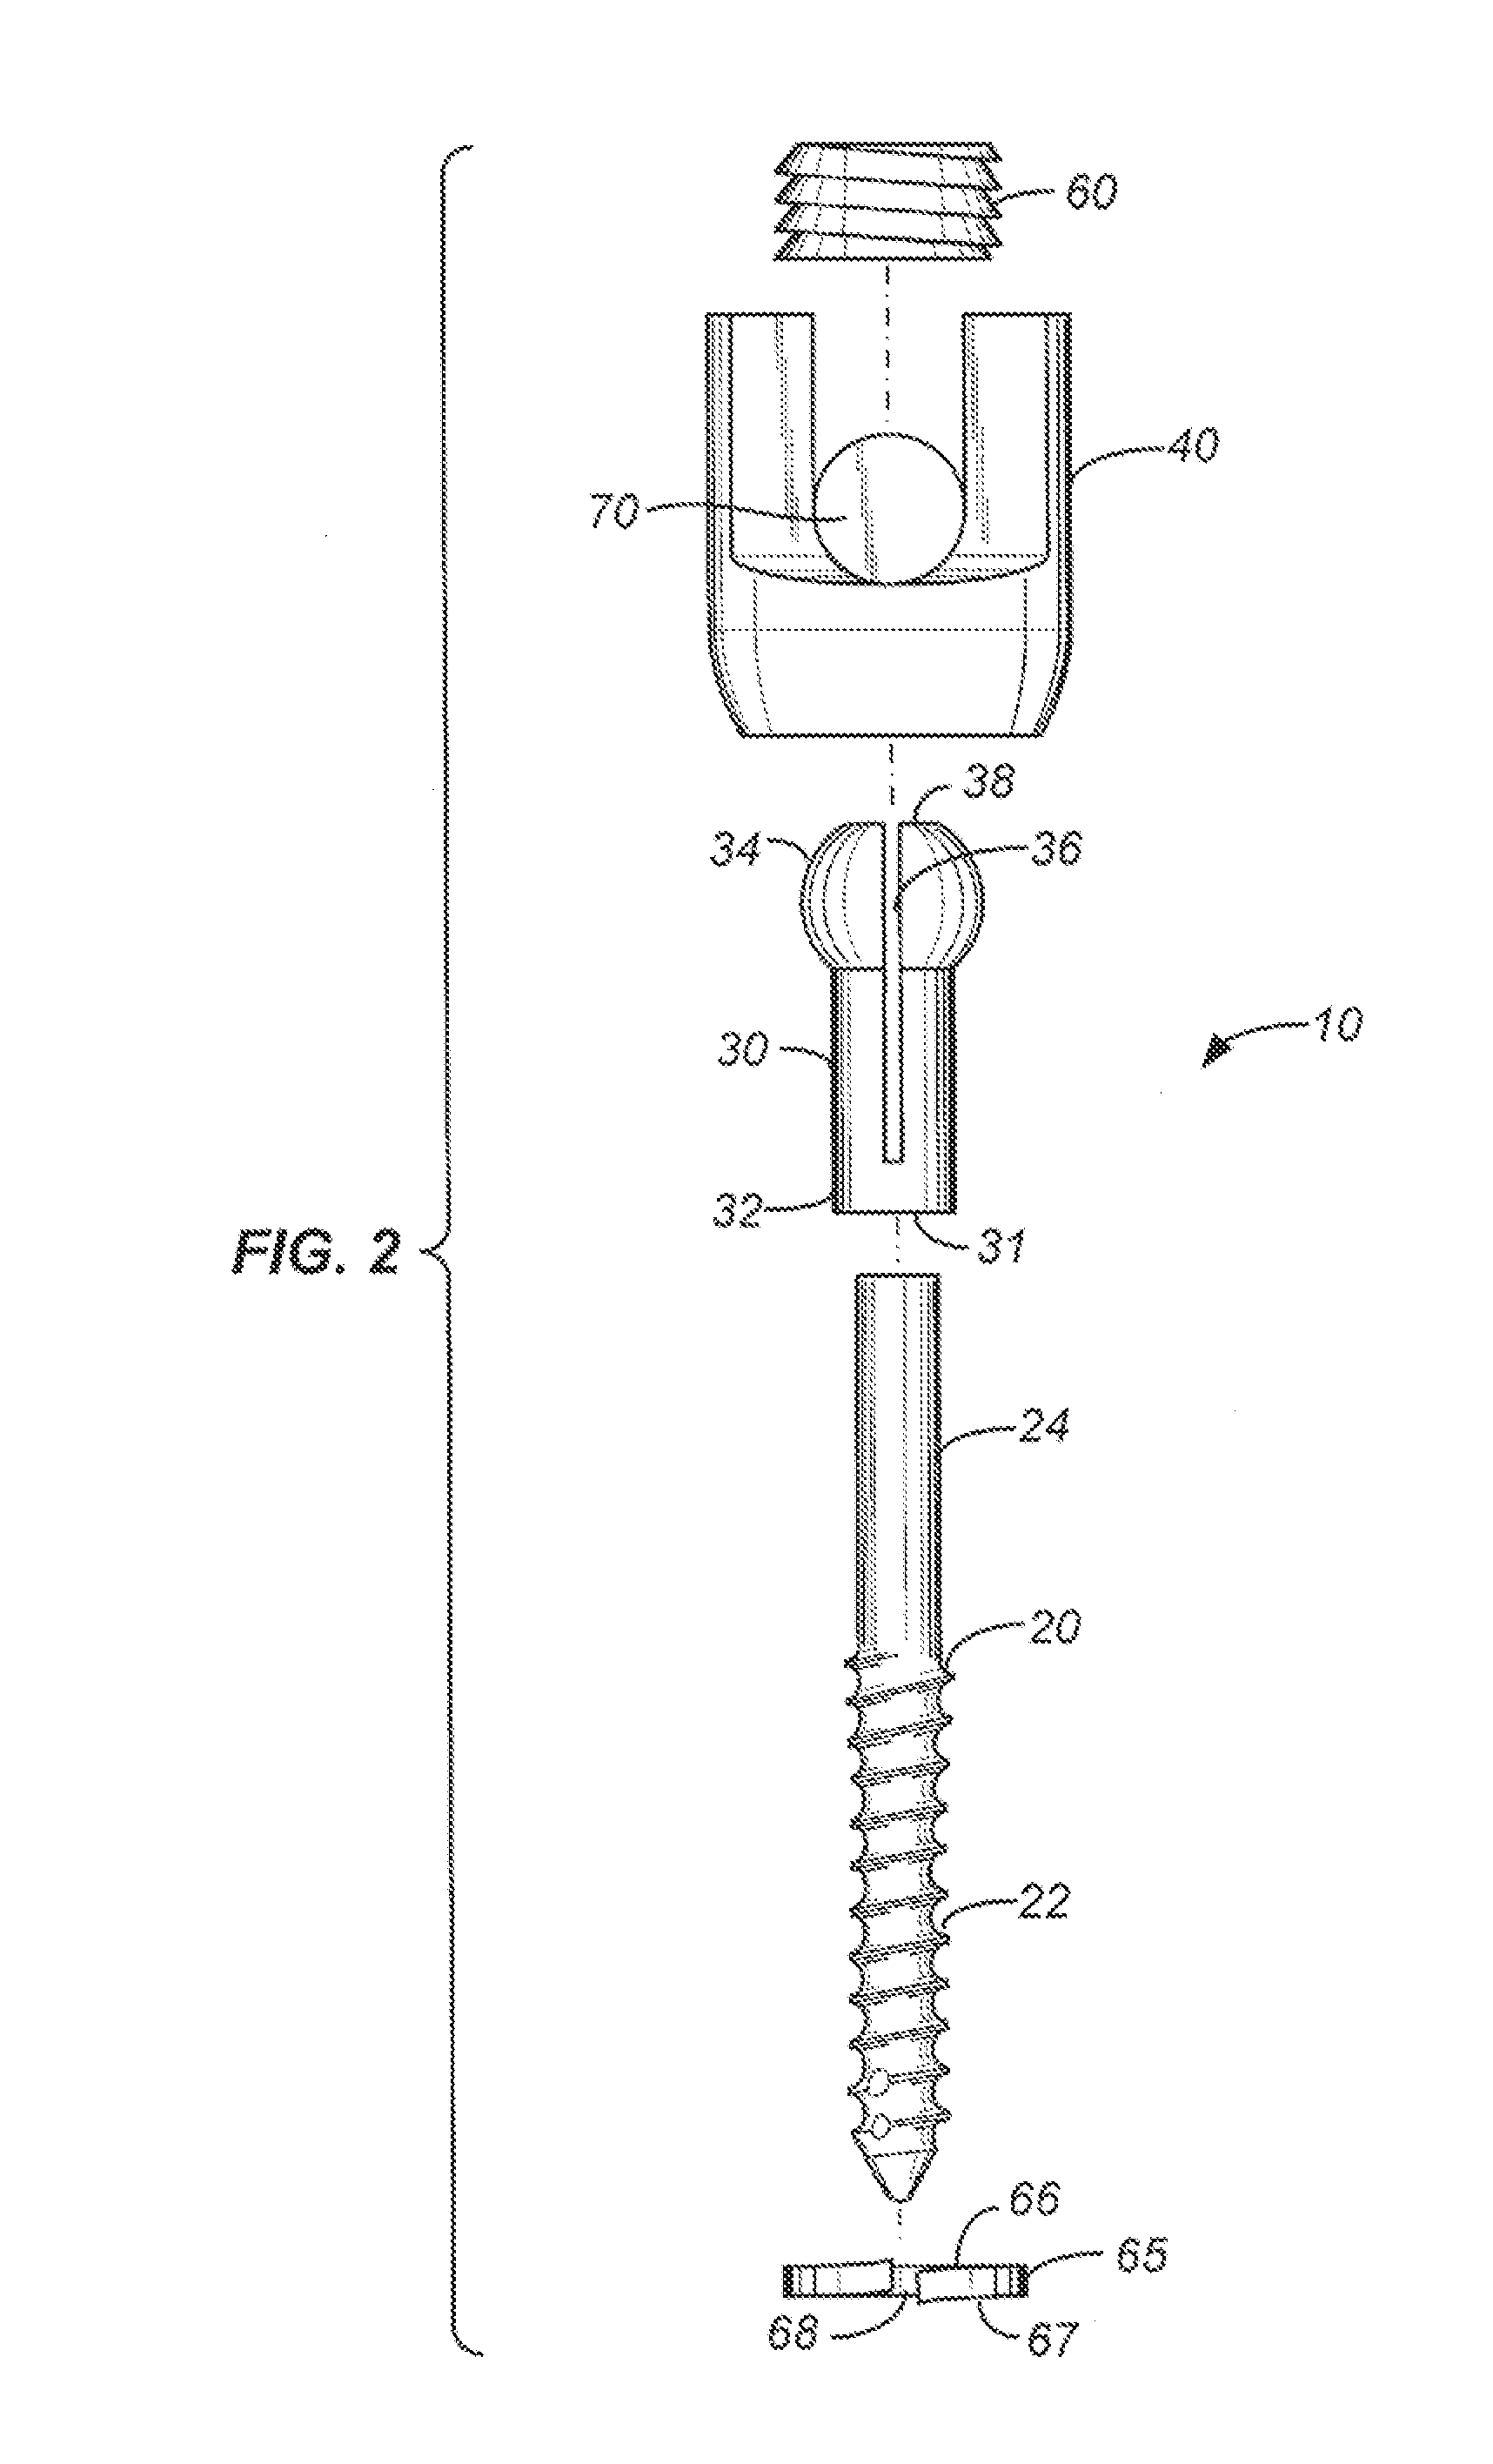 Variable height, multi-axial bone screw assembly